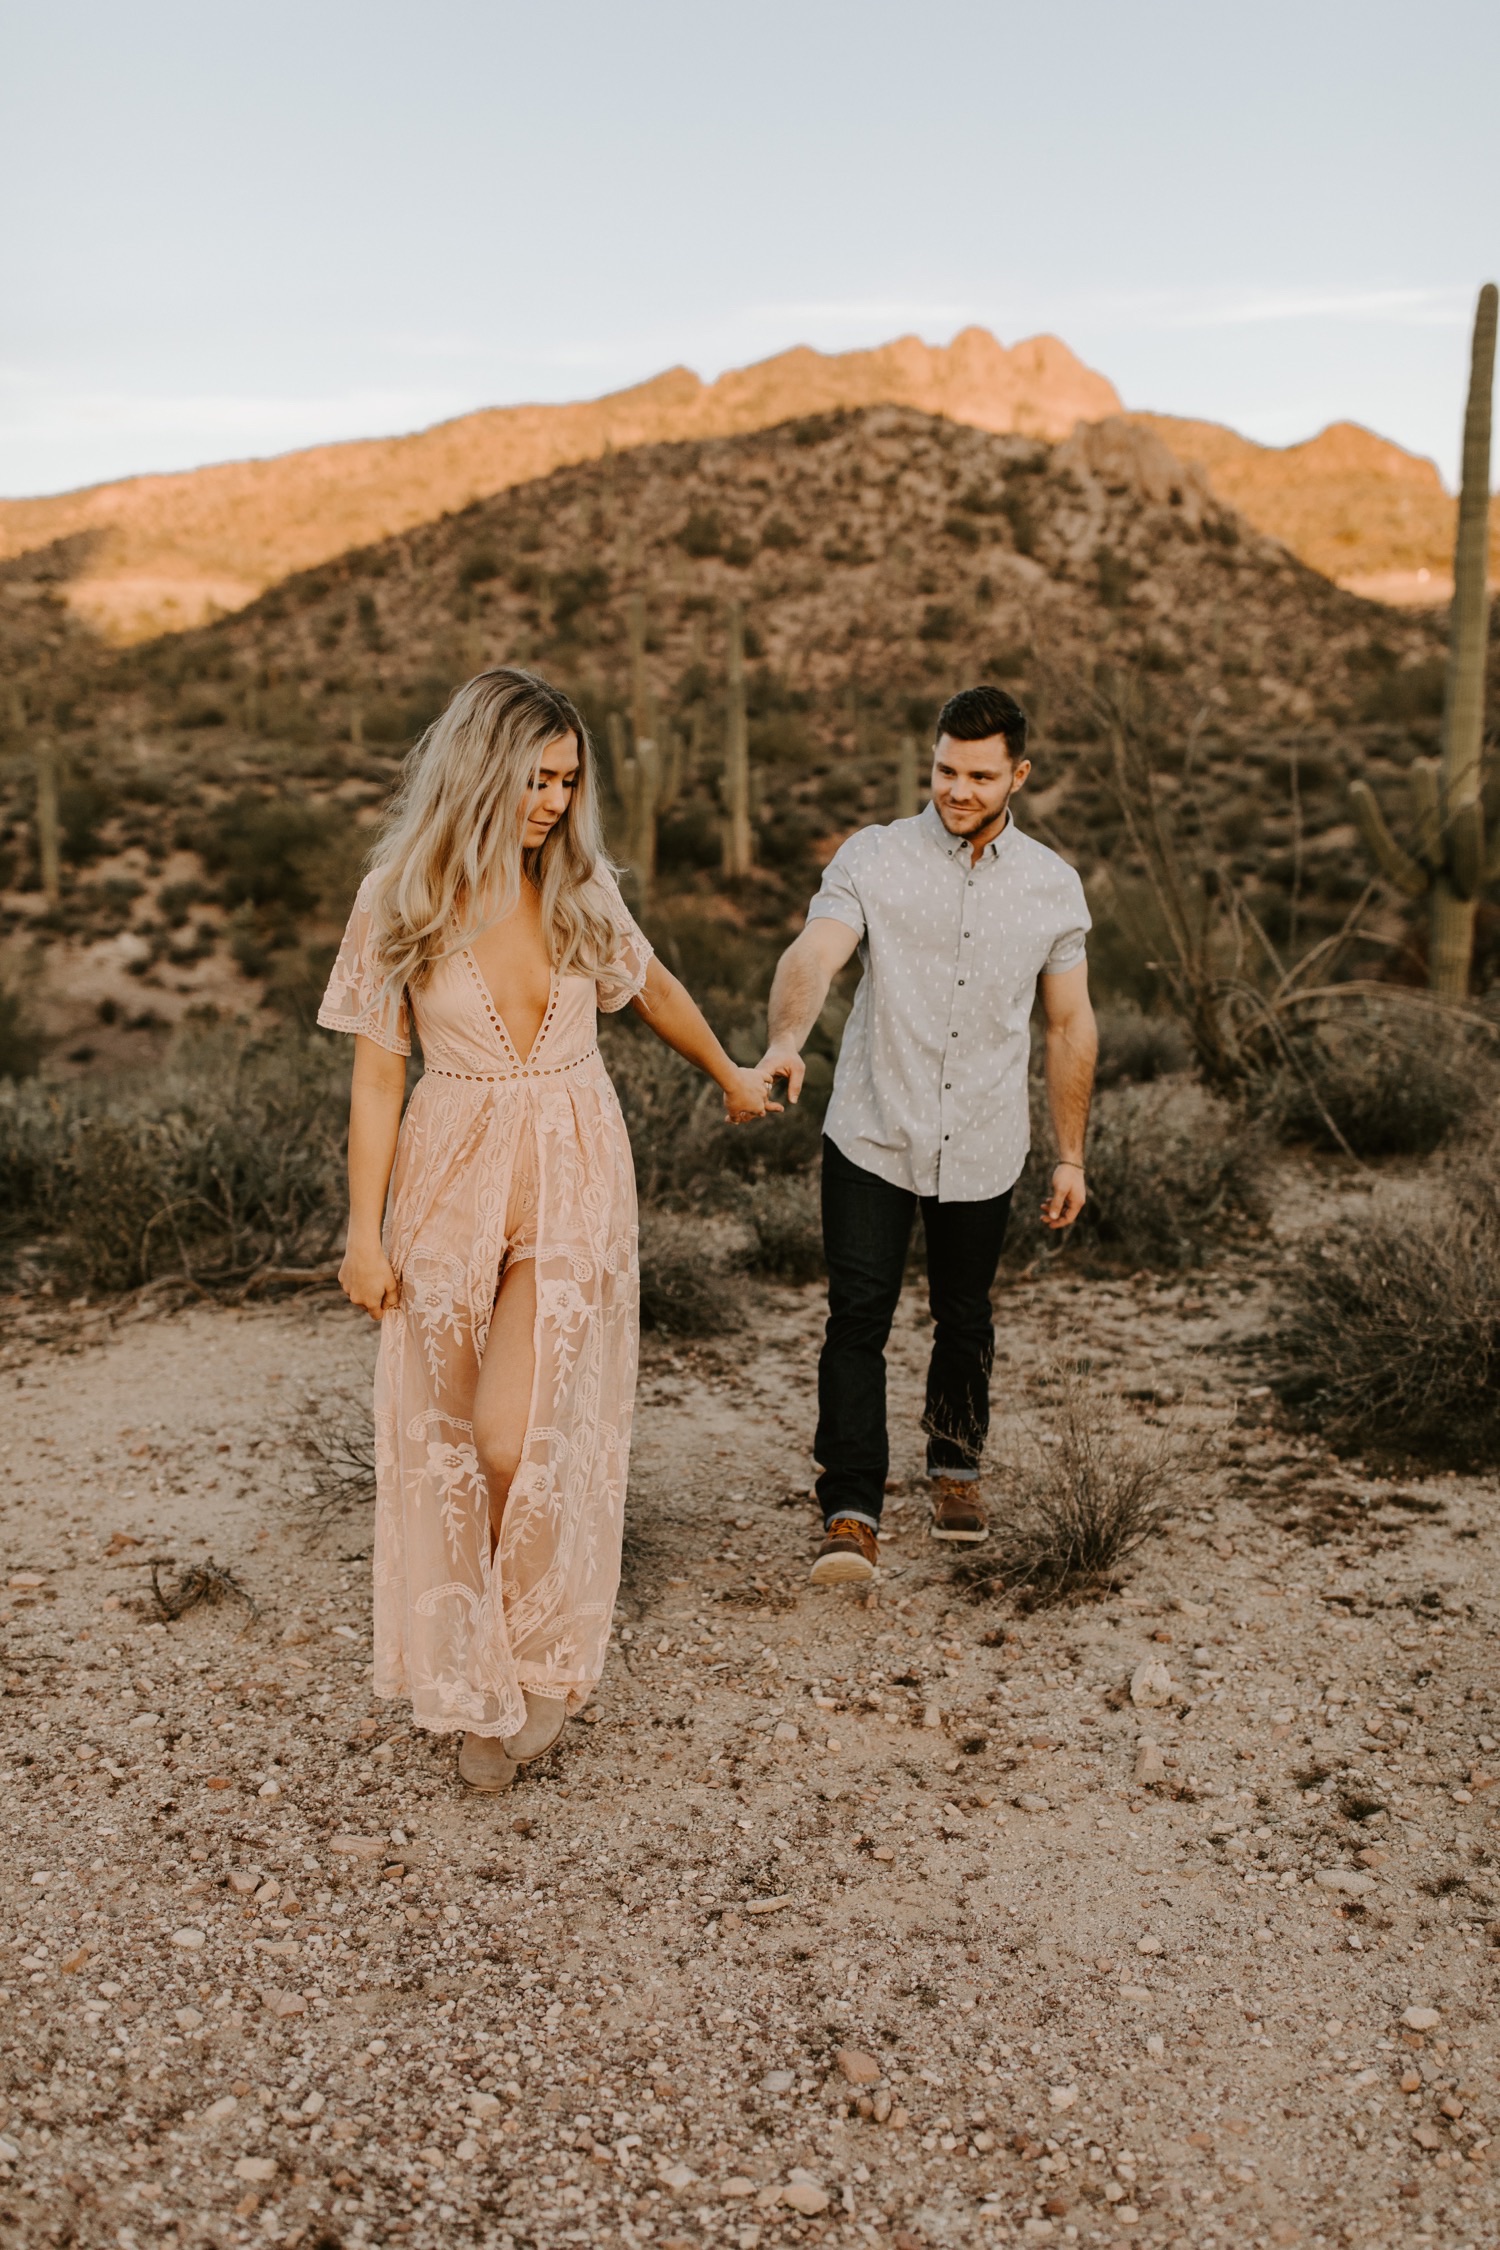 Walking through the desert hand in hand with a cute pink lace low cut dress